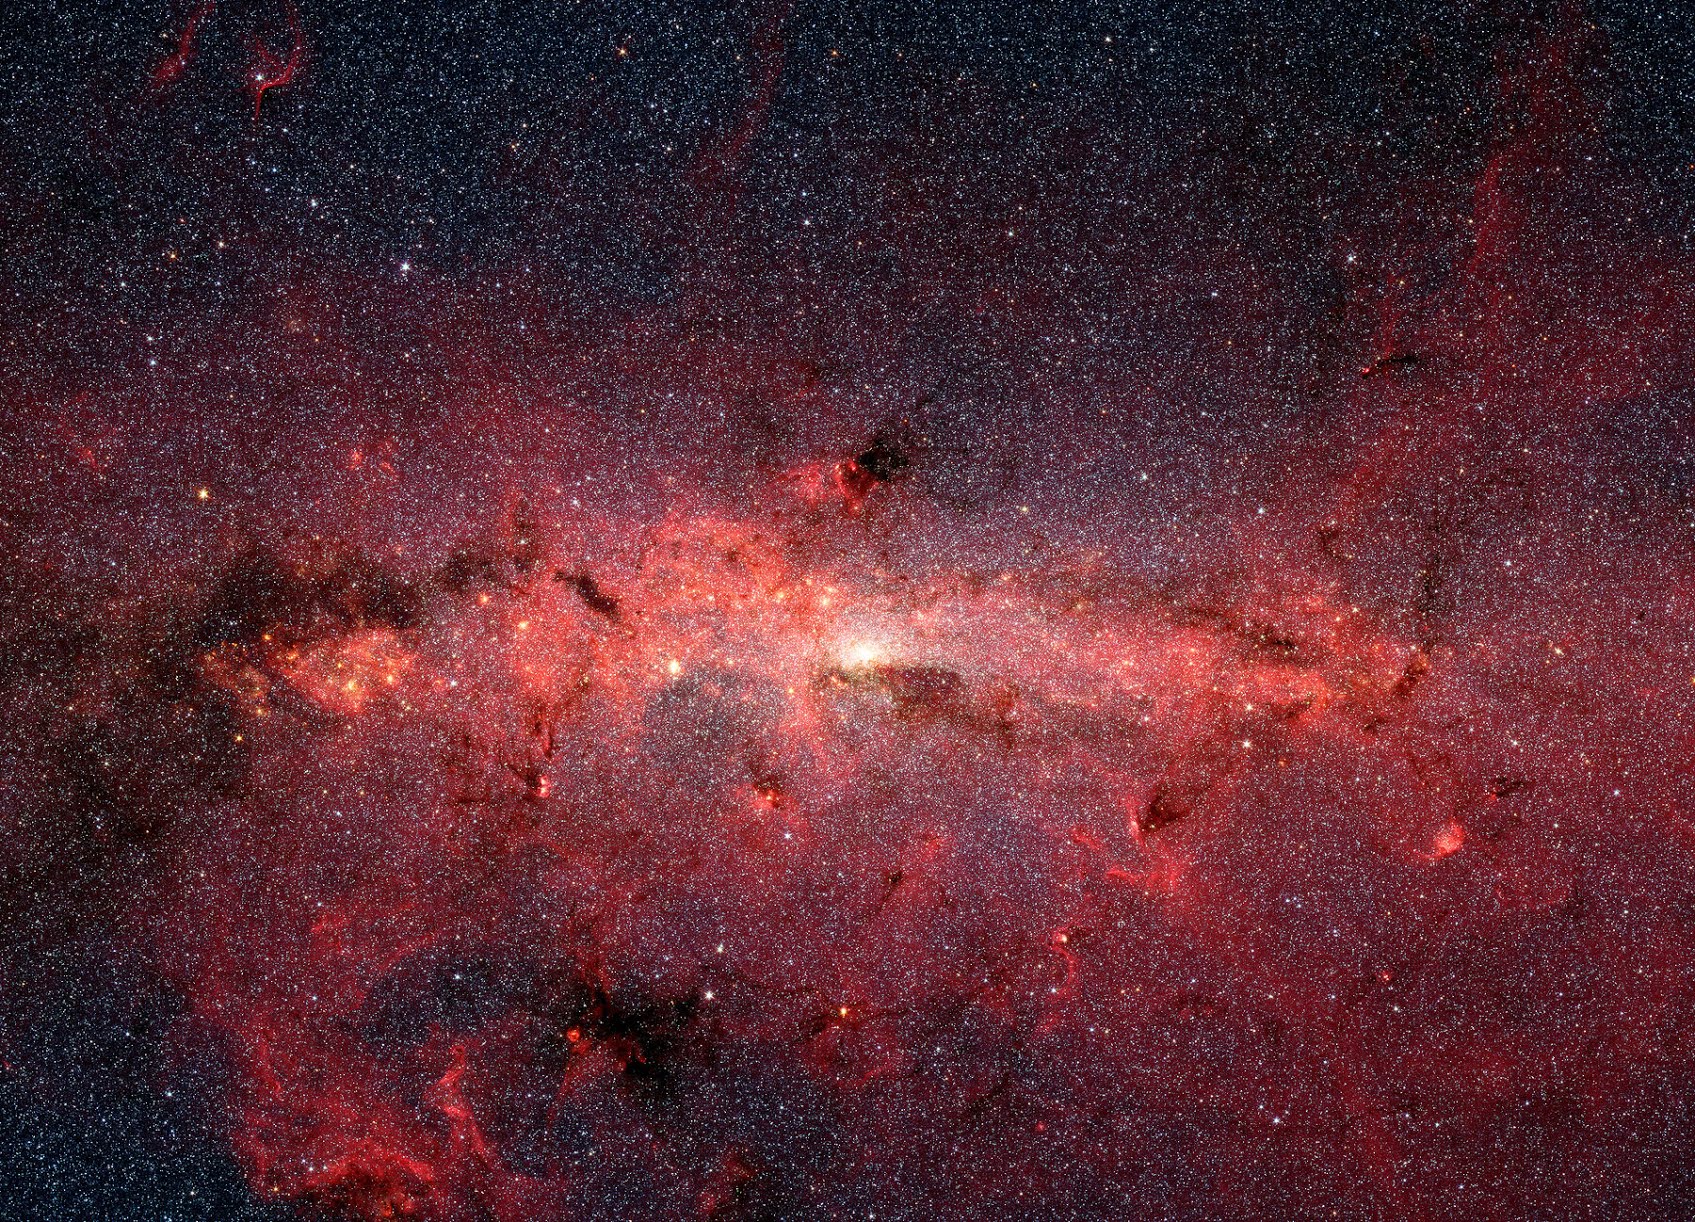 Index of the sky glimpses 700 million cosmic articles